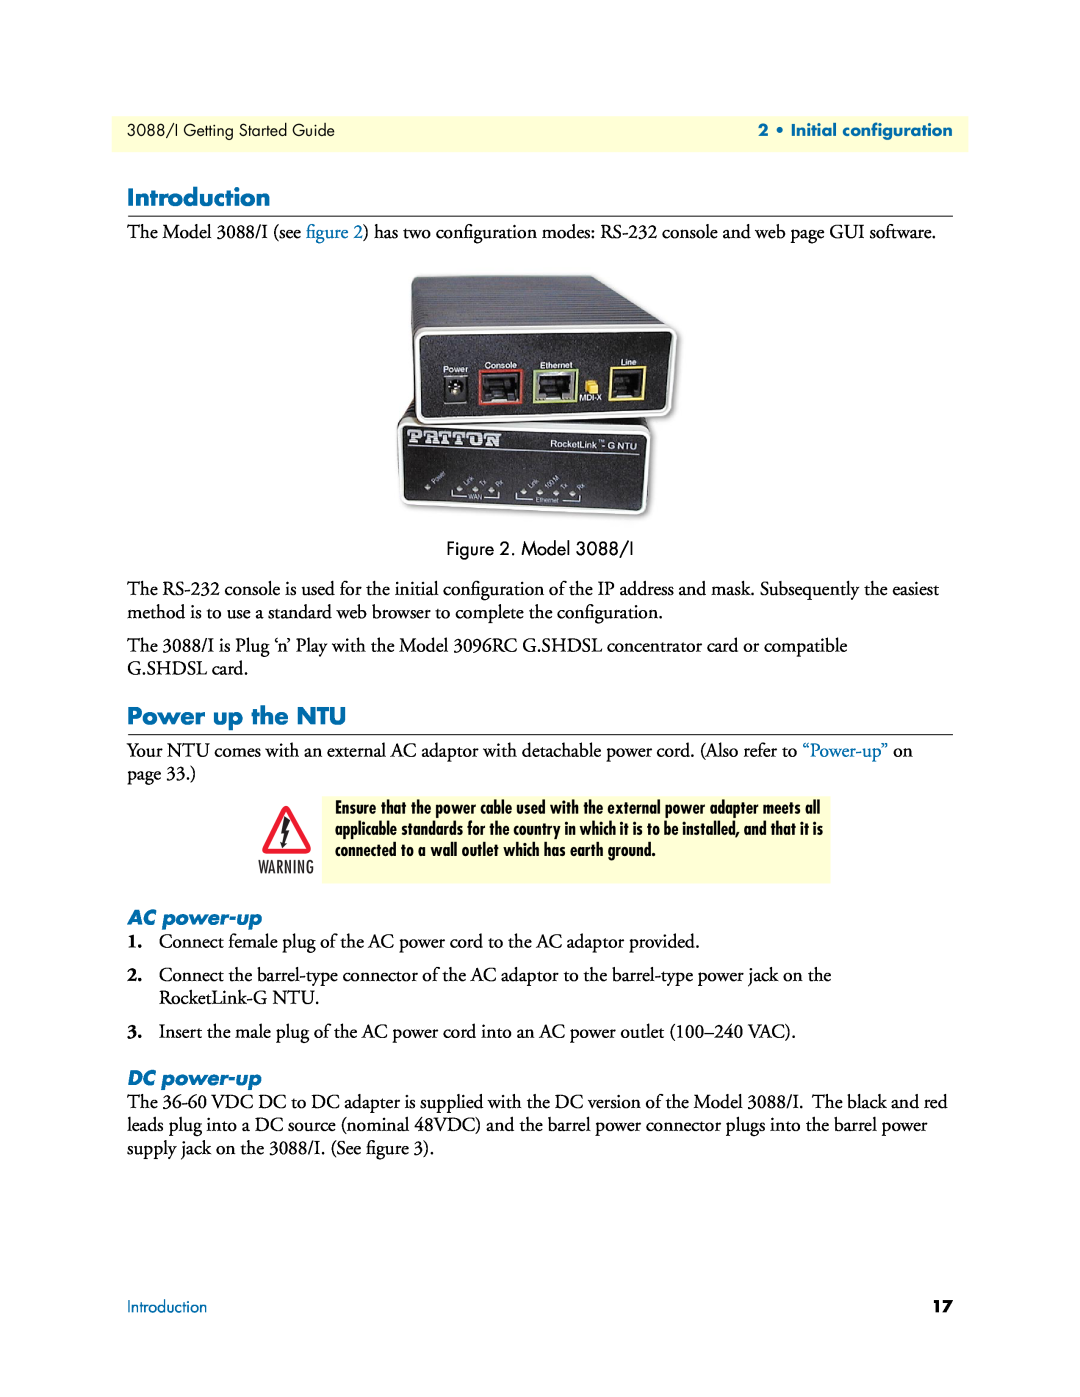 Patton electronic Model 3088/I manual Introduction, Power up the NTU, AC power-up, DC power-up 